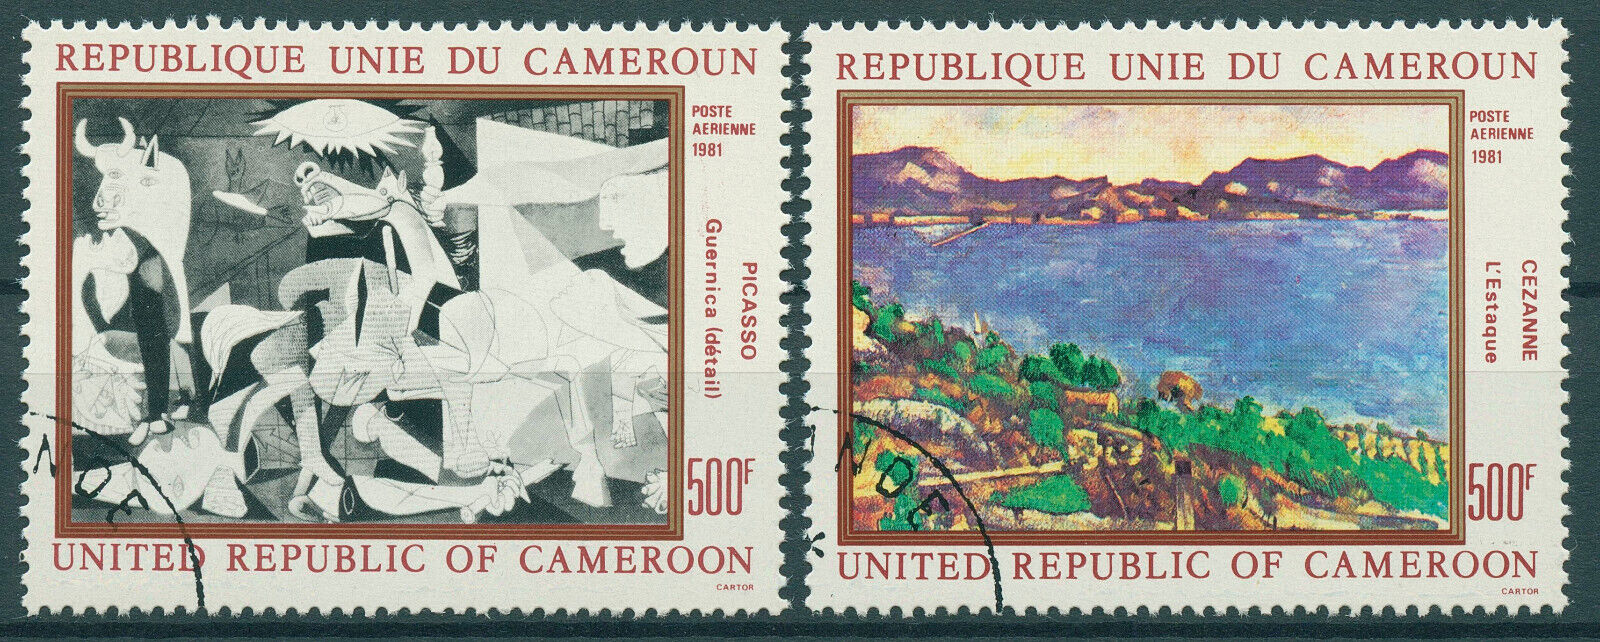 Cameroon 1981 CTO Art Stamps Paintings Pablo Picasso Guernica Cezanne 2v Set